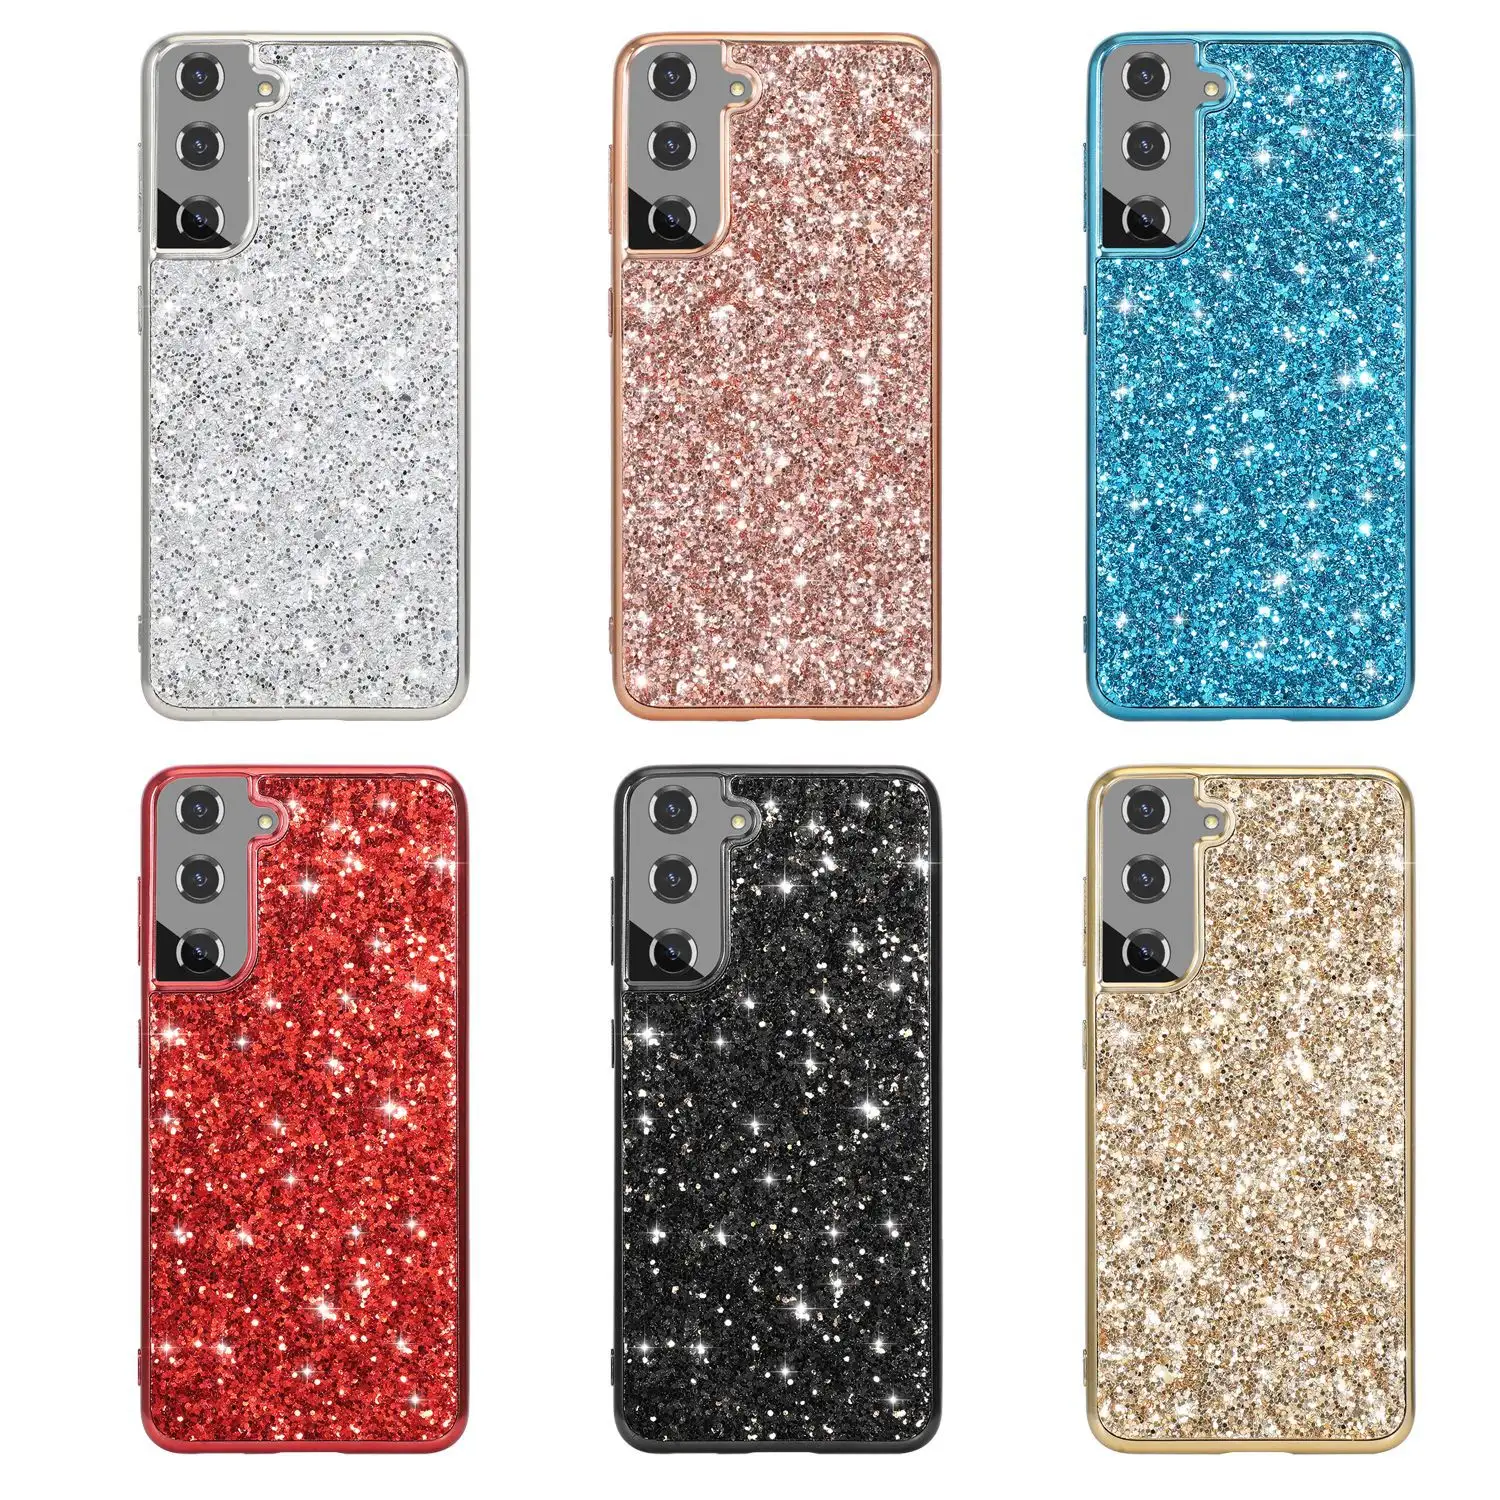 New Model Electroplated Diamond Glitter Bling Back Cover Case Phone Case For Samsung S21 S21 Plus S21 Ultra